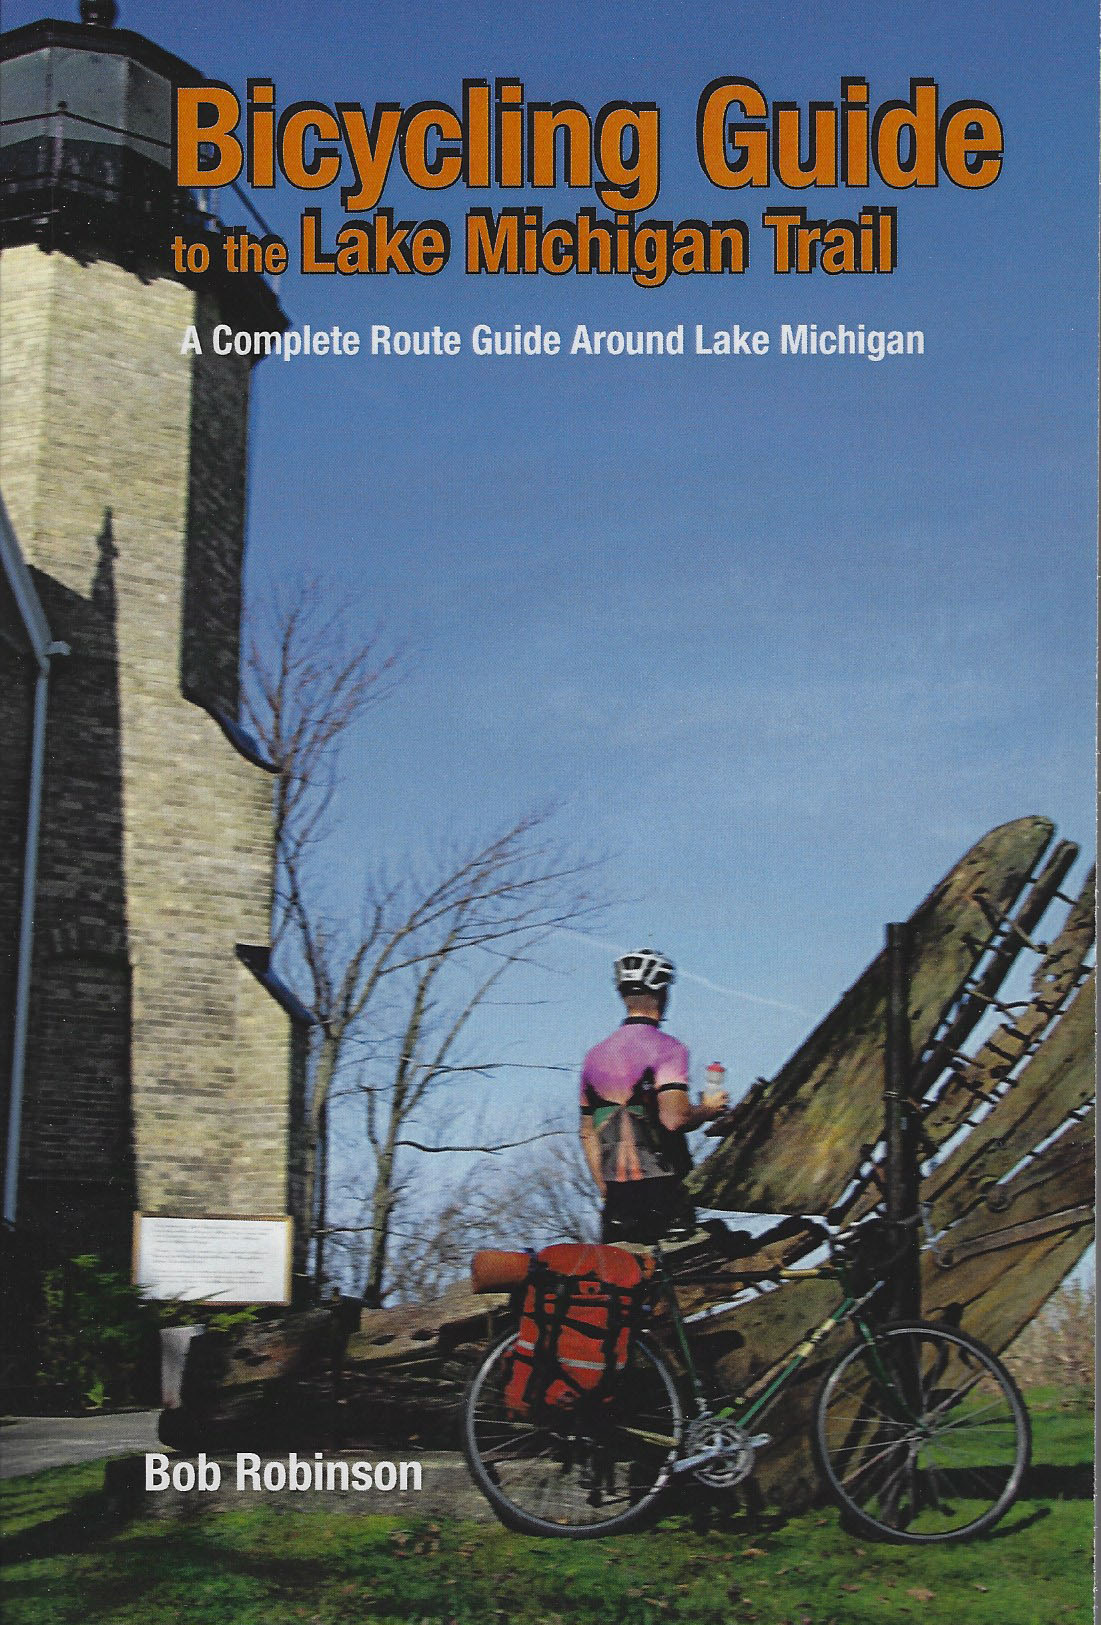 Bicycling Guide to the Lake Michigan Trail